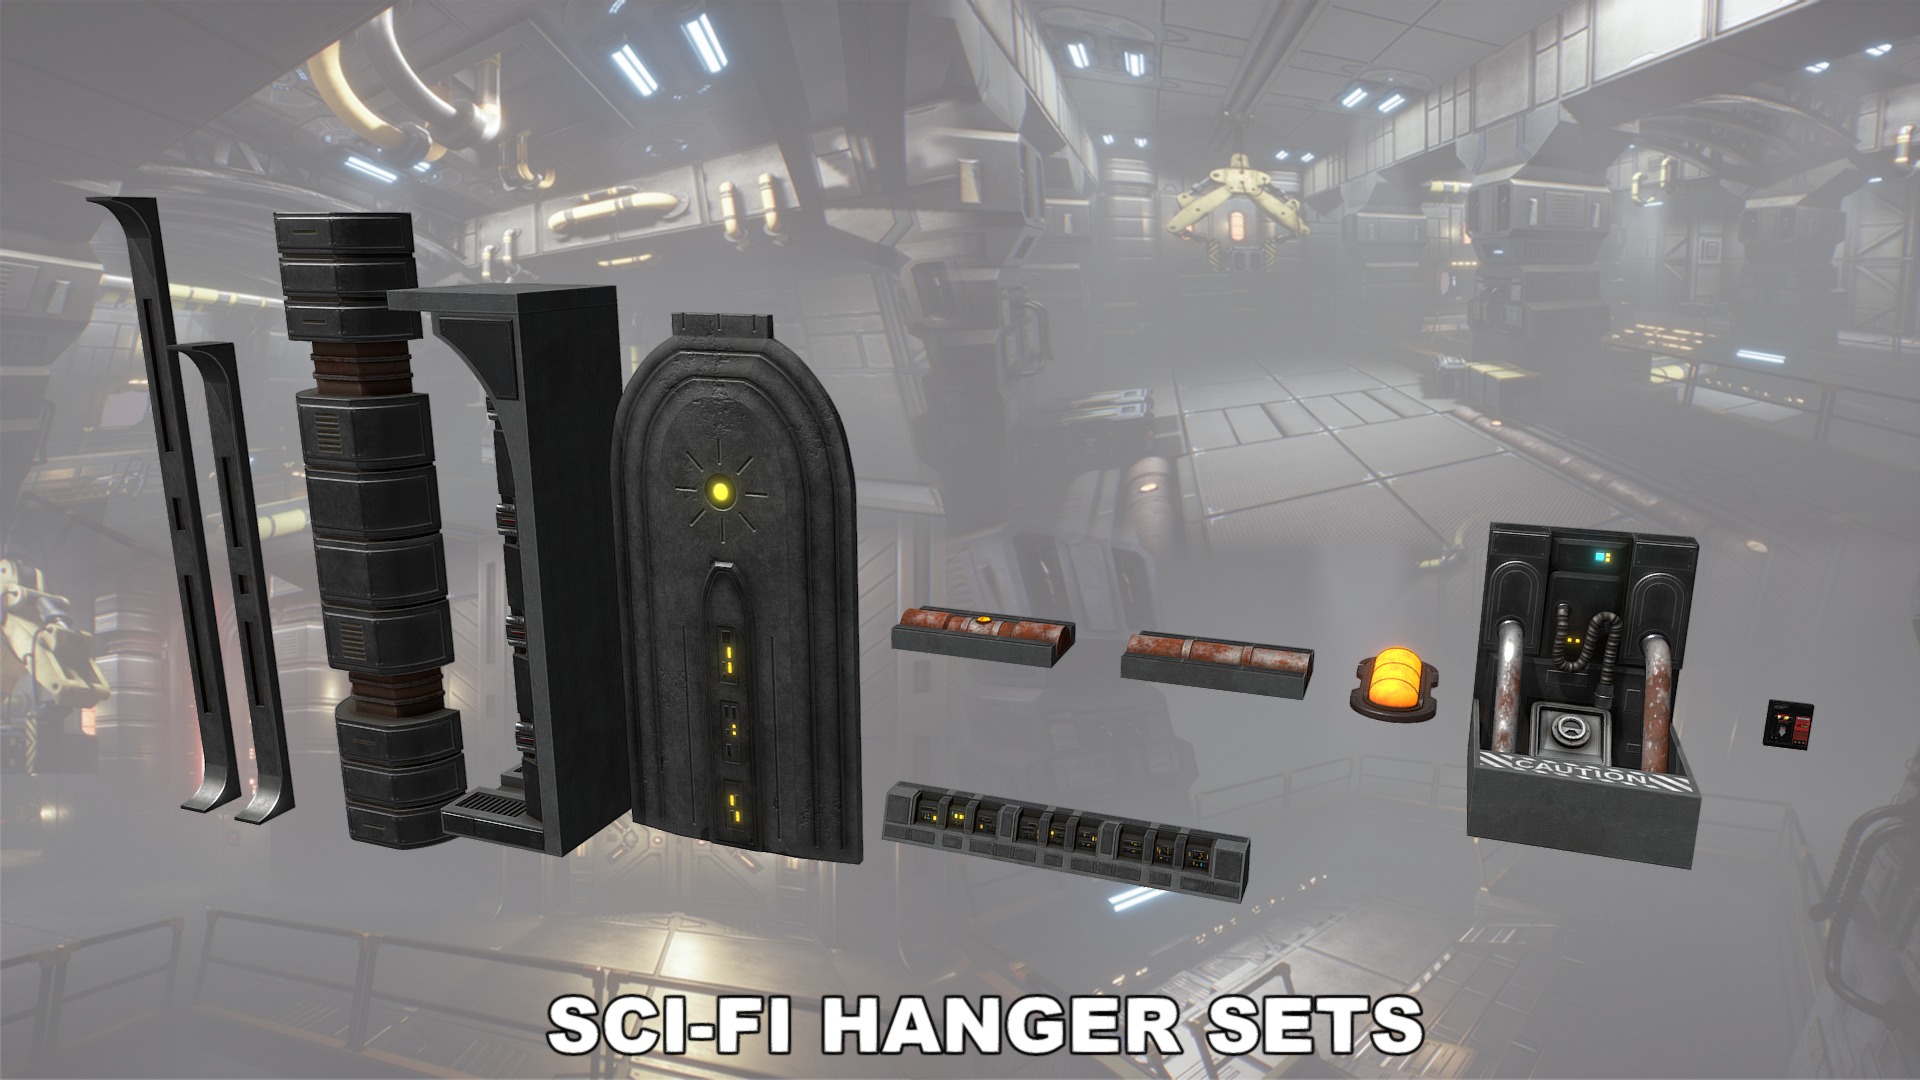 3D model Sci-fi Asset Hangerpack 004 - This is a 3D model of the Sci-fi Asset Hangerpack 004. The 3D model is about a room with a display of electronic devices.